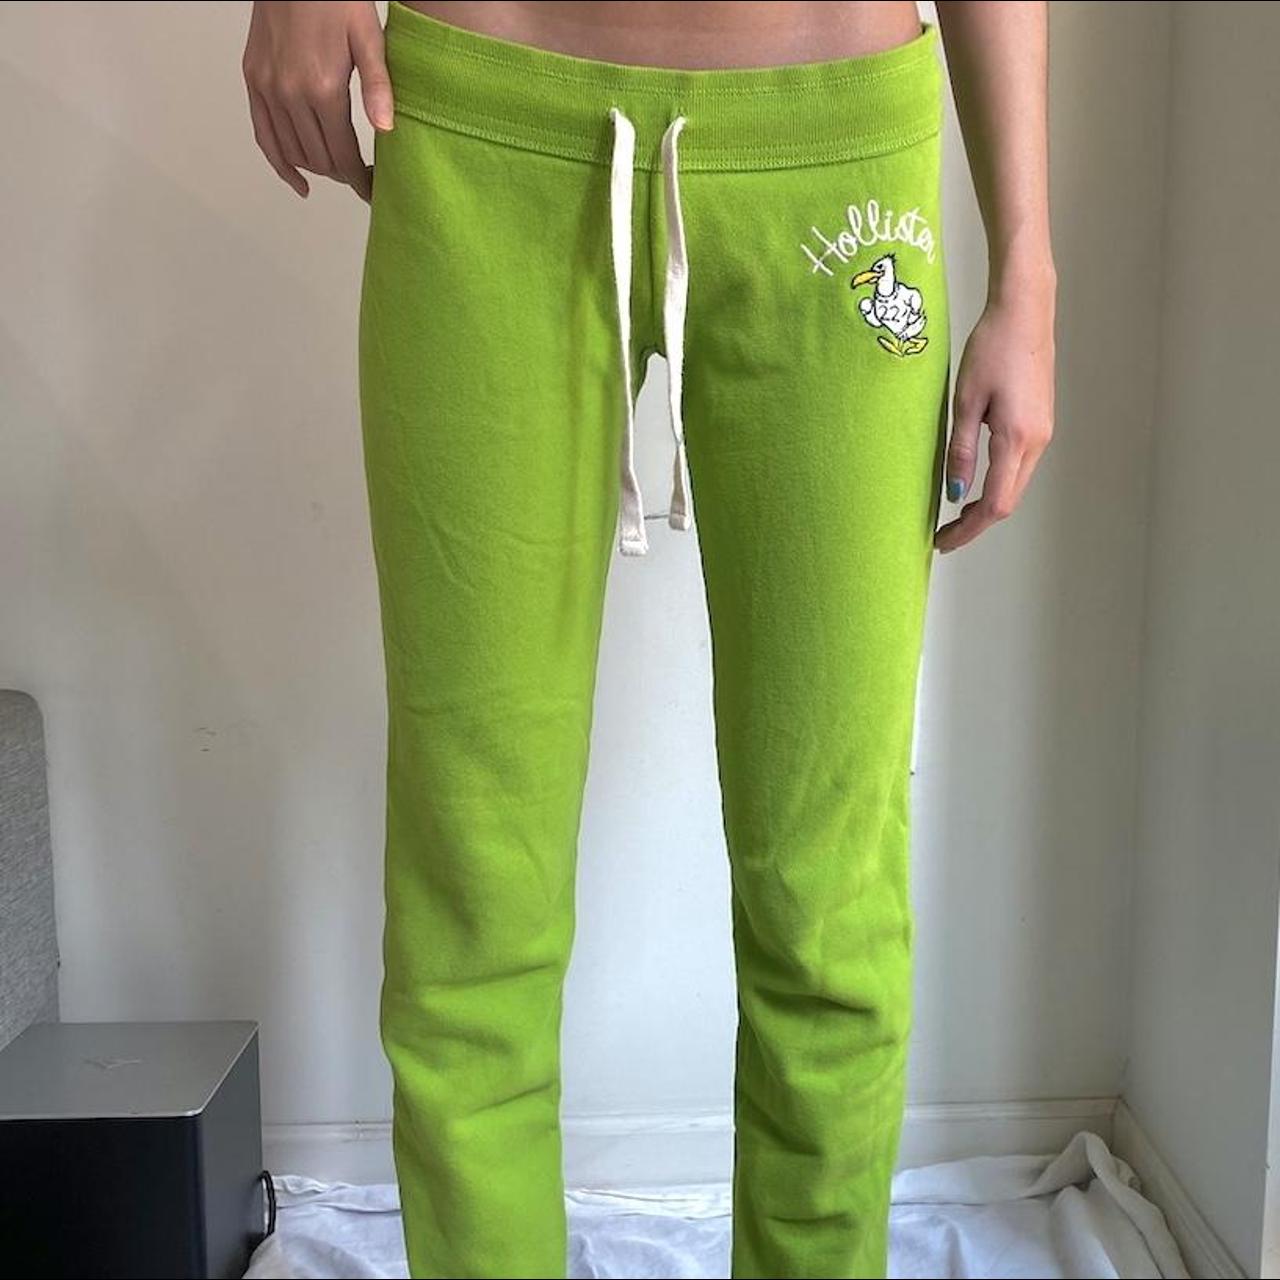 Bright green hollister sweatpants with cute duck - Depop